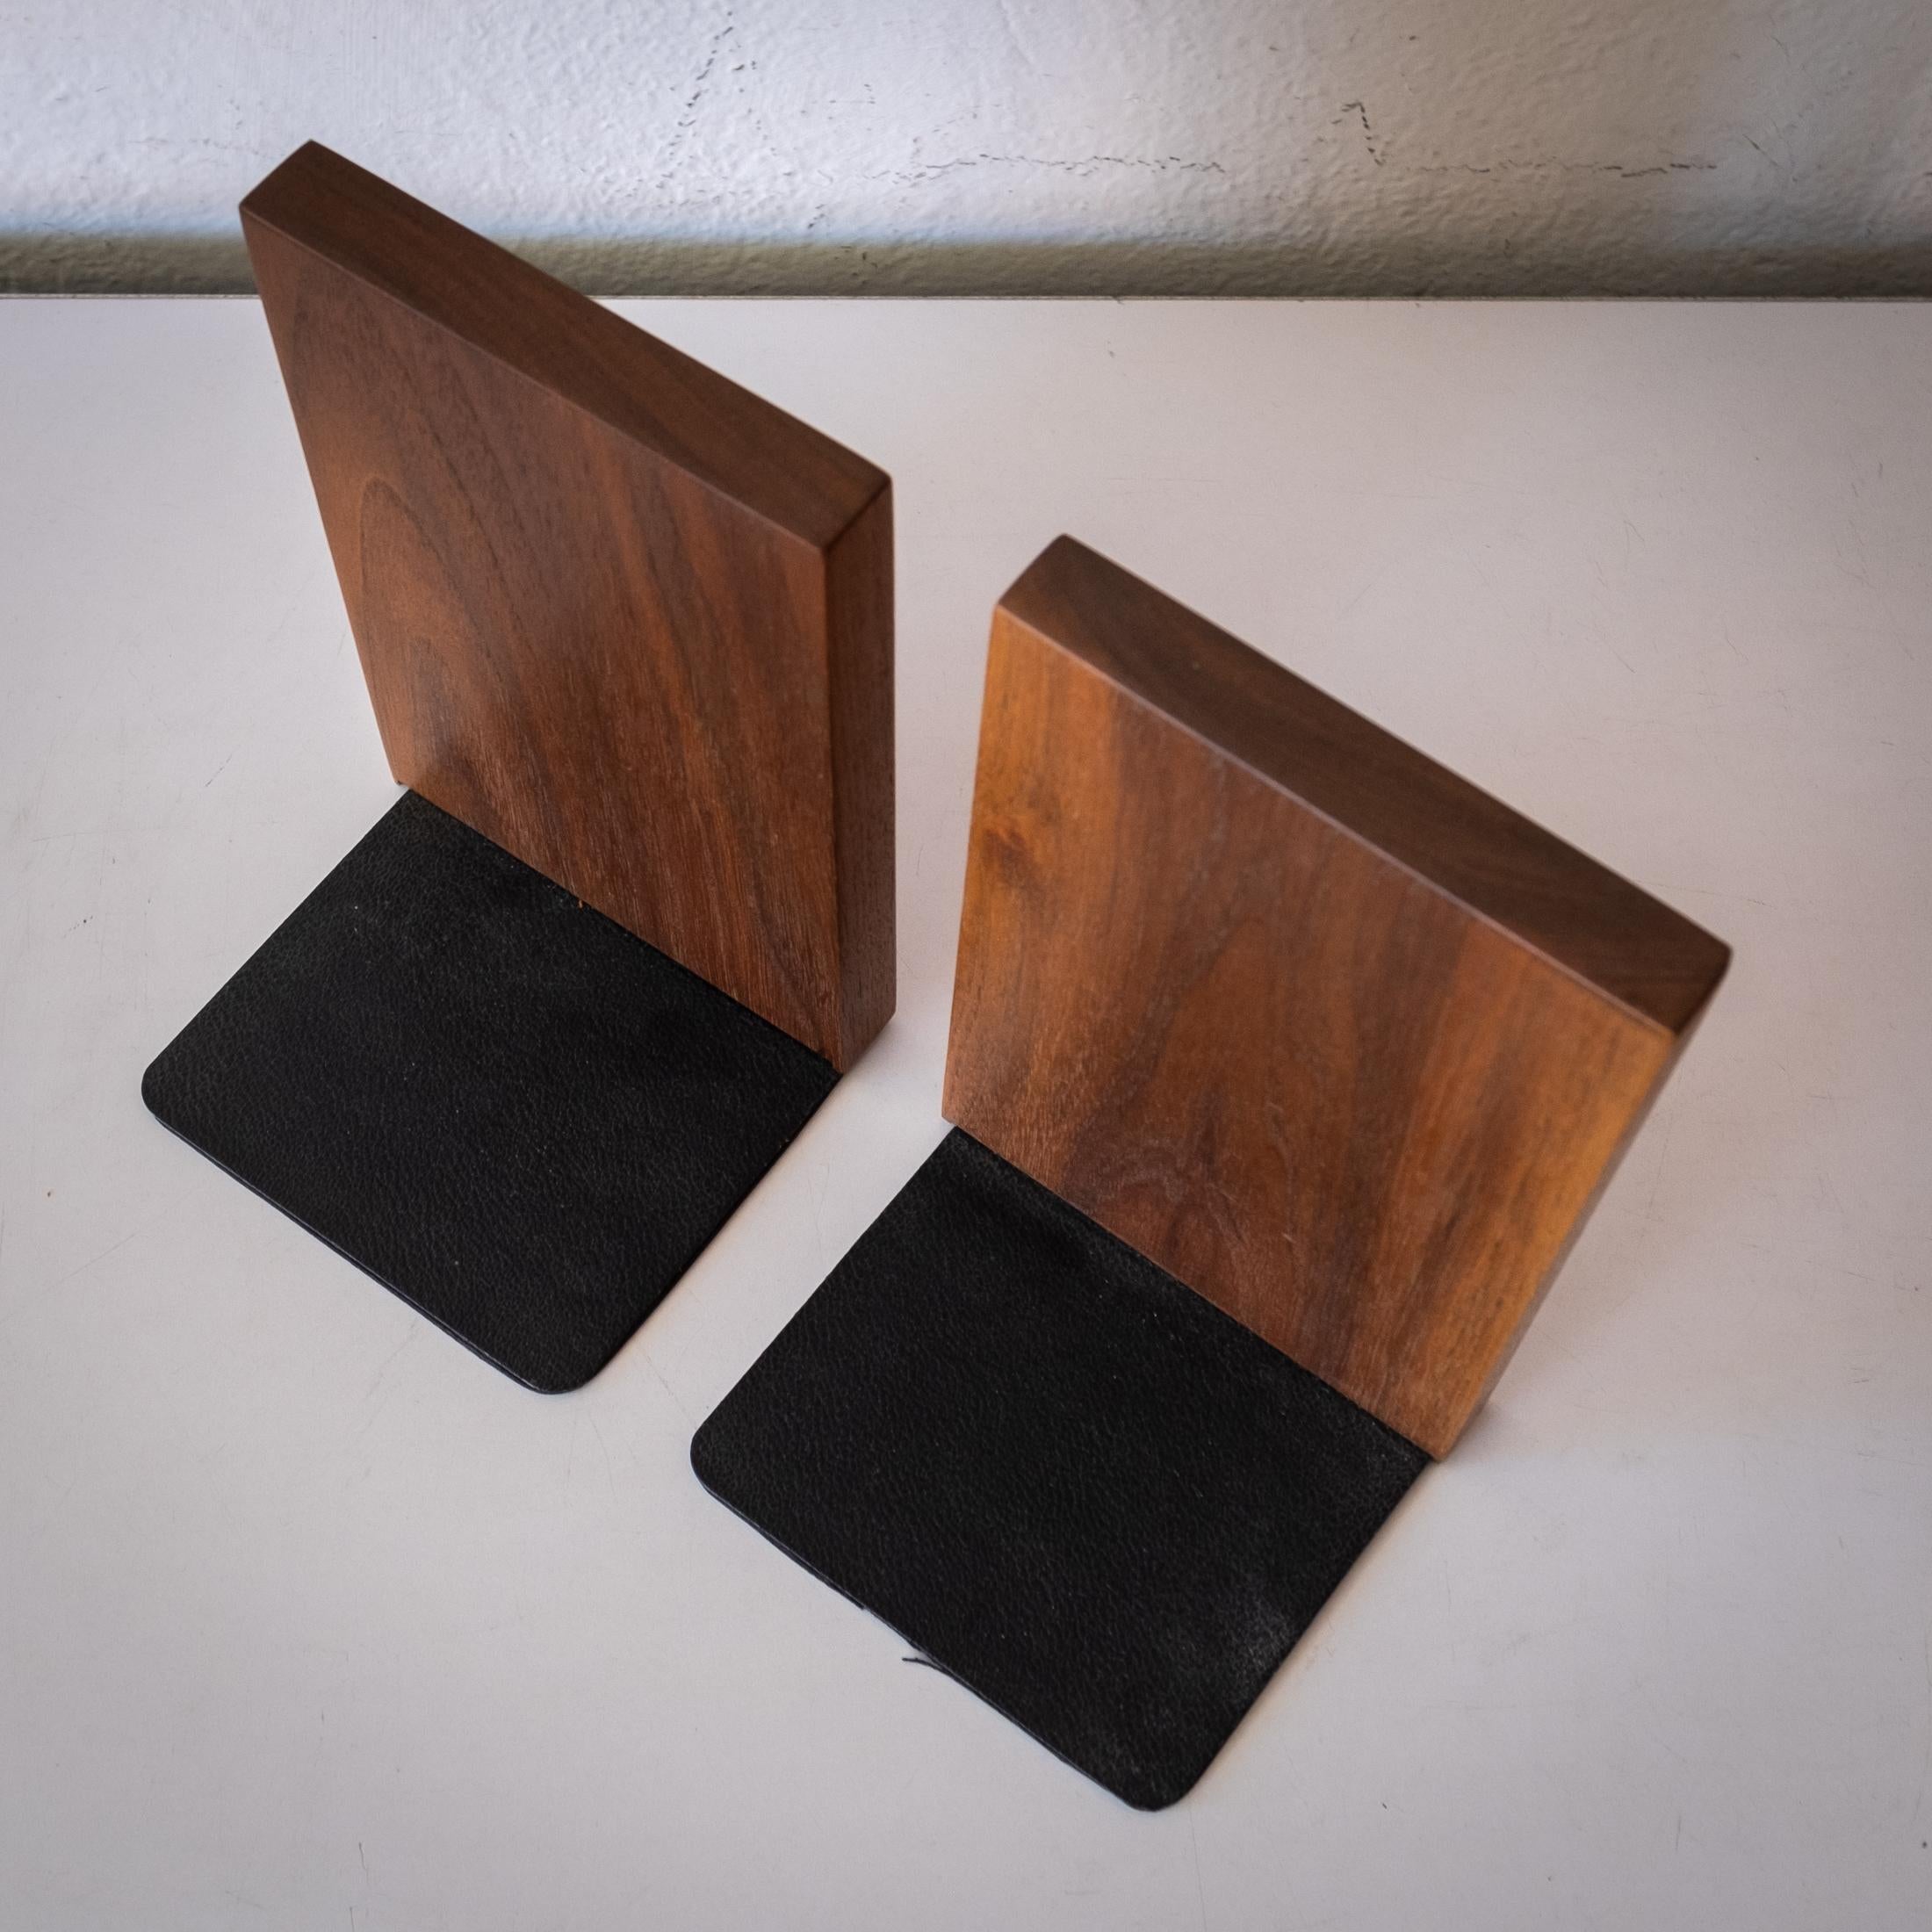 Midcentury Walnut and Ceramic Tile and Bookends For Sale 2